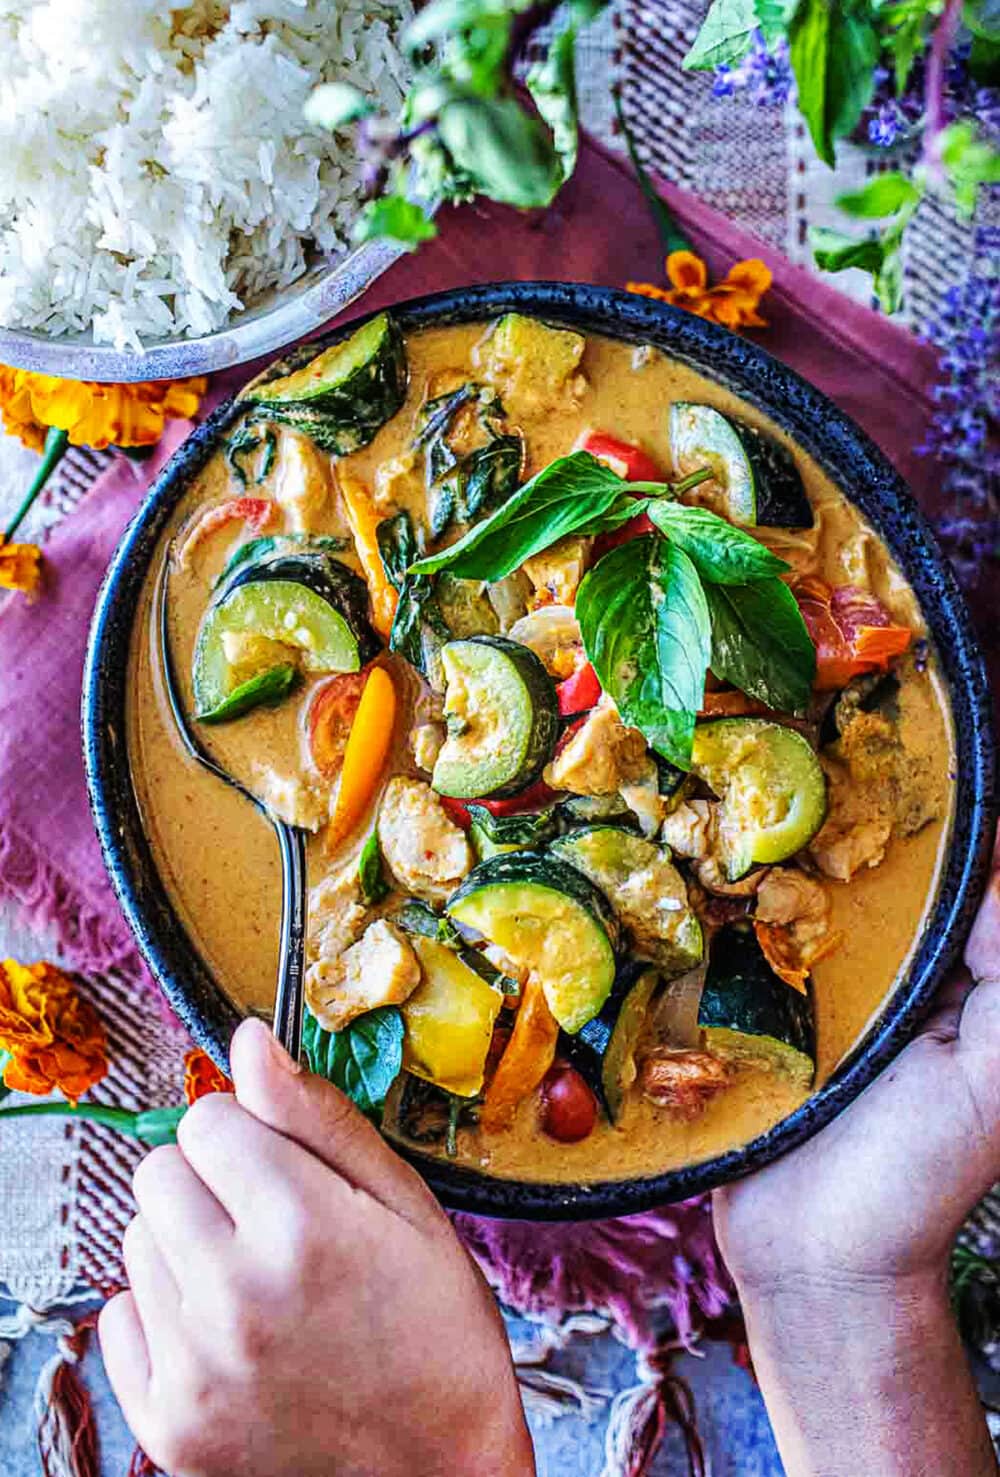 Zucchini Curry is a delightful dish made with Thai red curry paste, coconut milk and chicken or tofu. A healthy, flavorful 30-minute dinner.